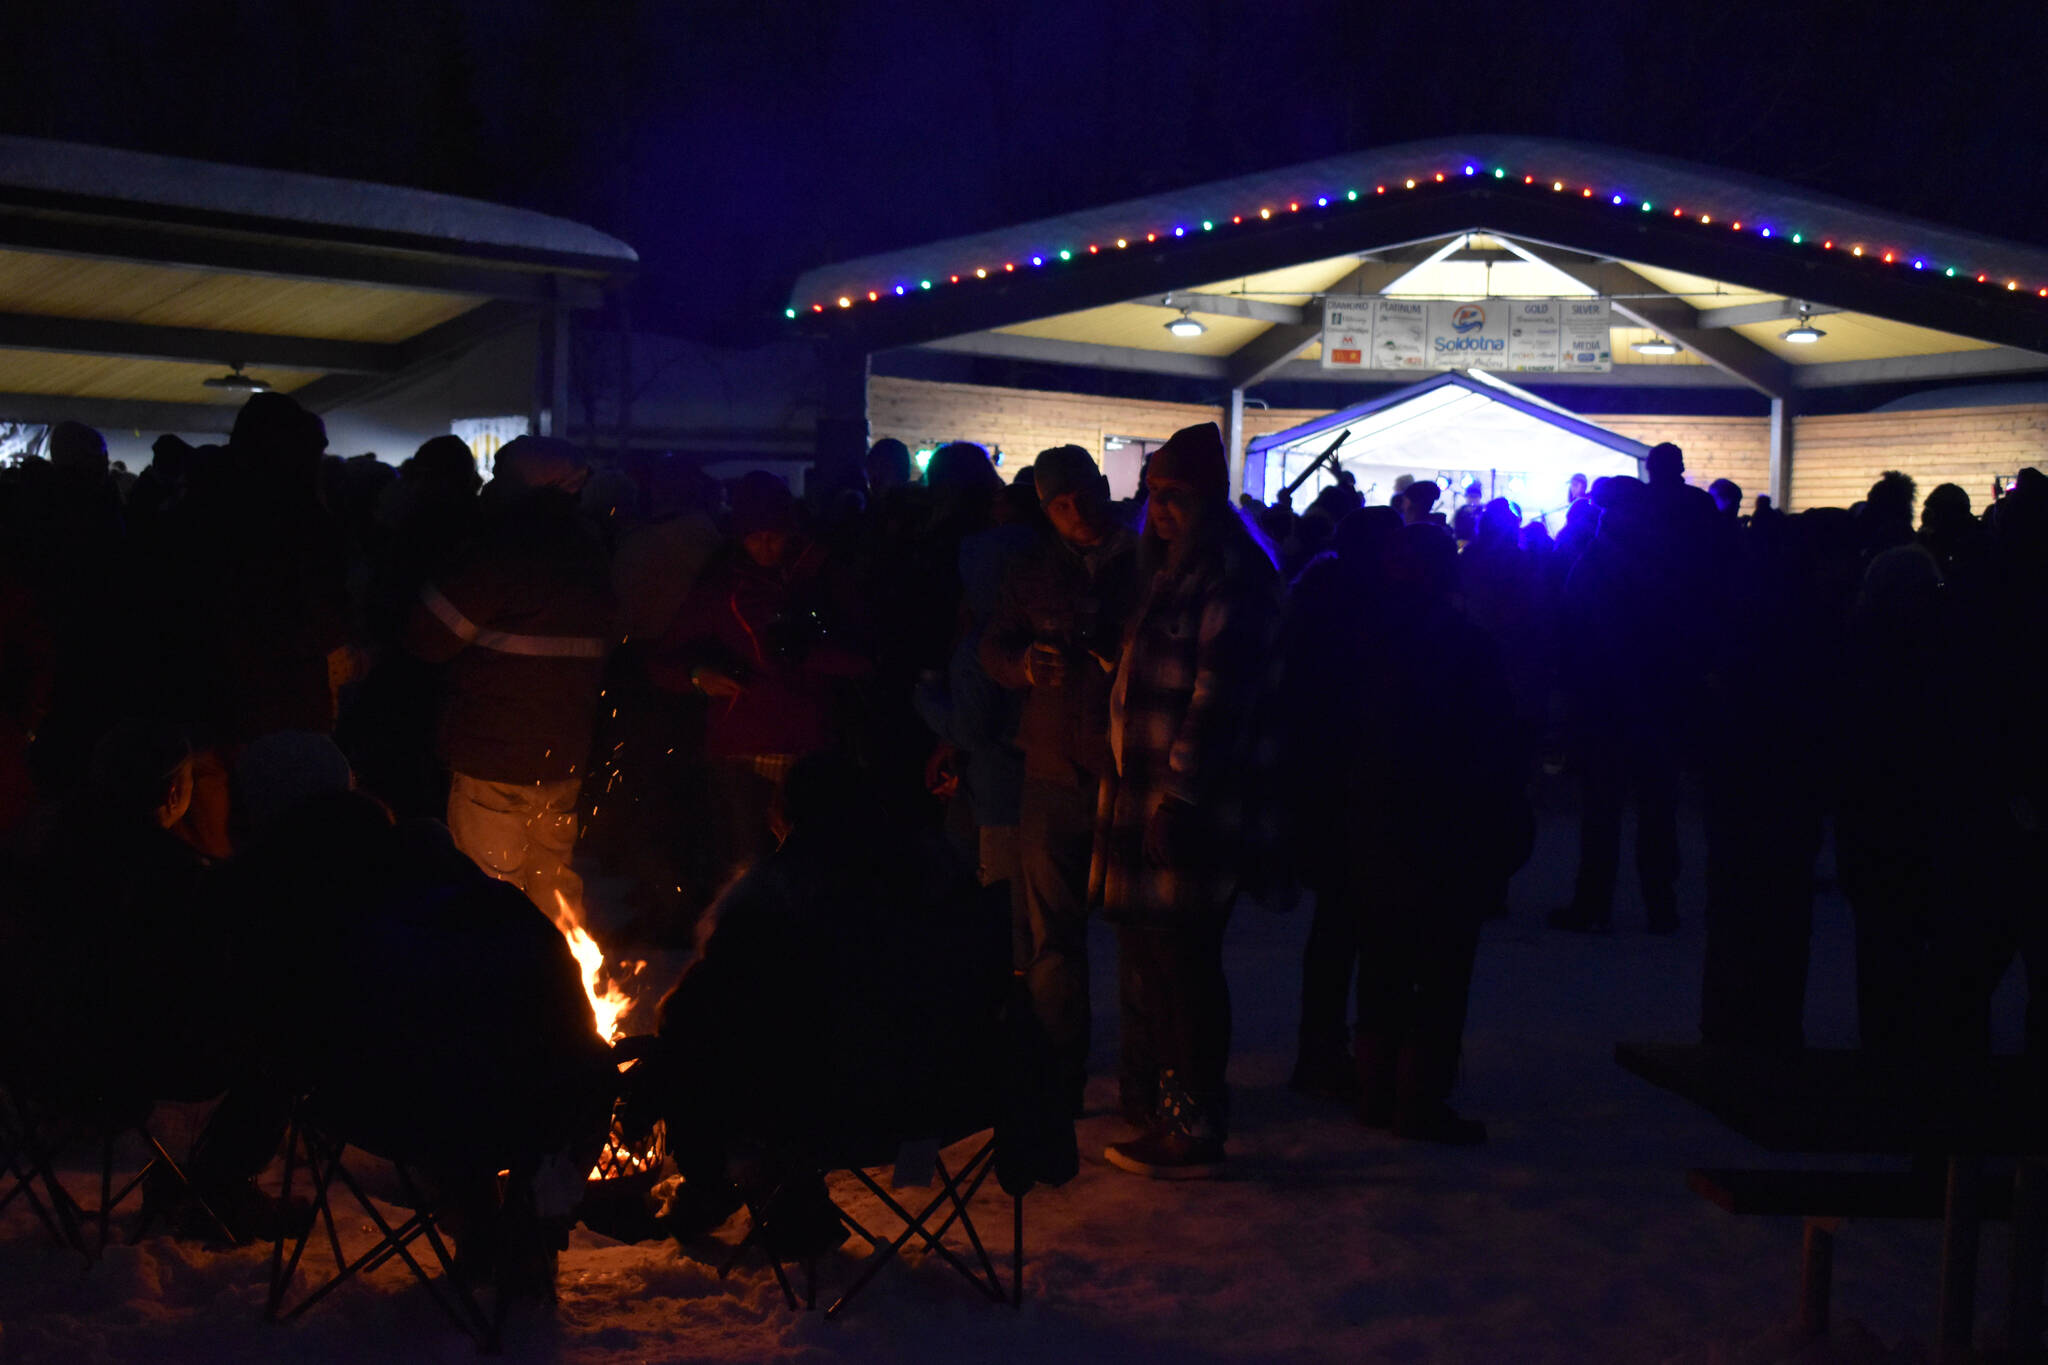 Attendees gather around fires or the stage during Frozen RiverFest on Saturday, Feb. 18, 2023 at Soldotna Creek Park in Soldotna, Alaska. (Jake Dye/Peninsula Clarion)